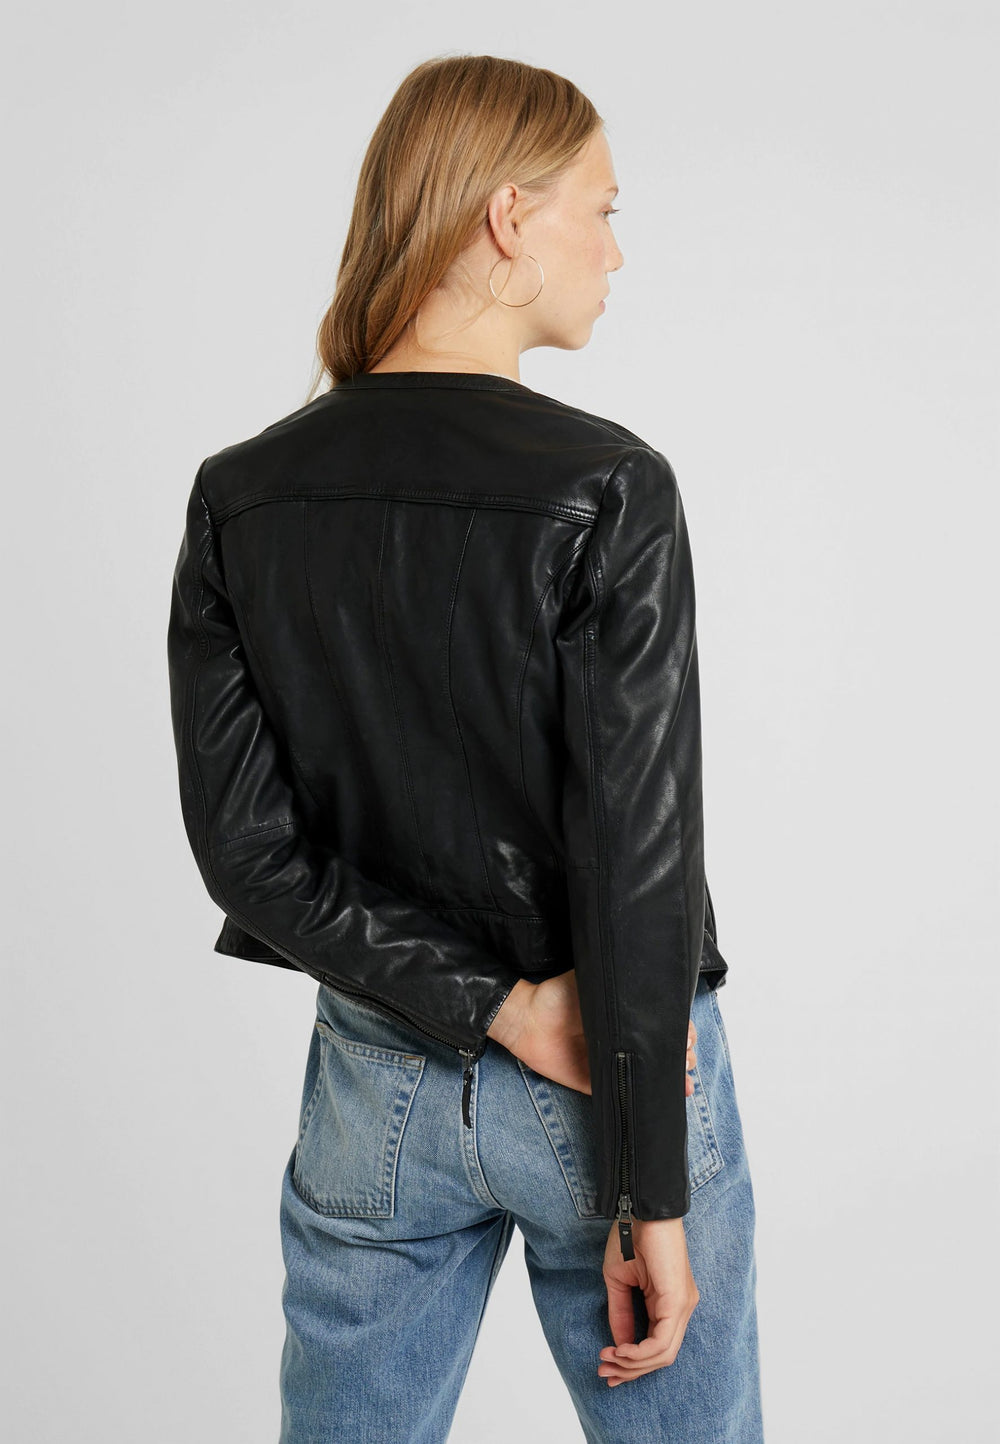 Classic Black Leather Jacket For Sale 